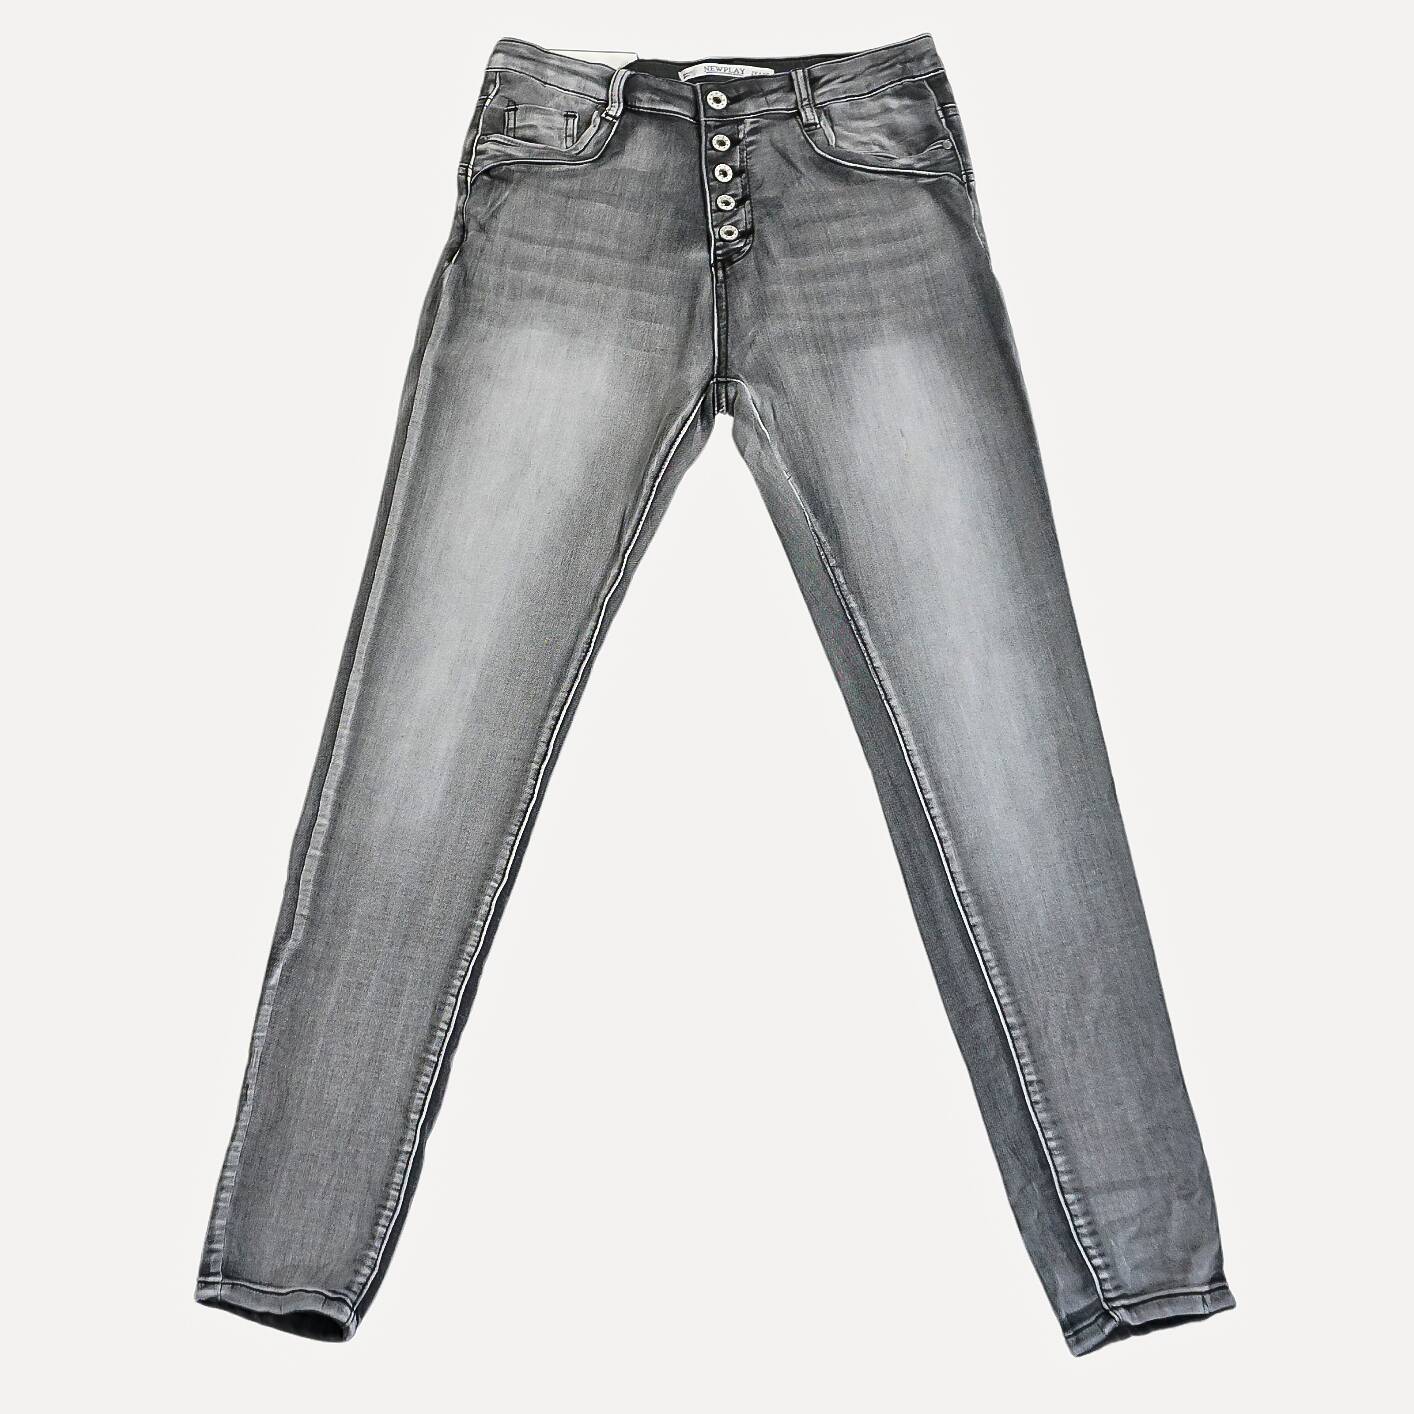 Reunion Jeans Washed Black